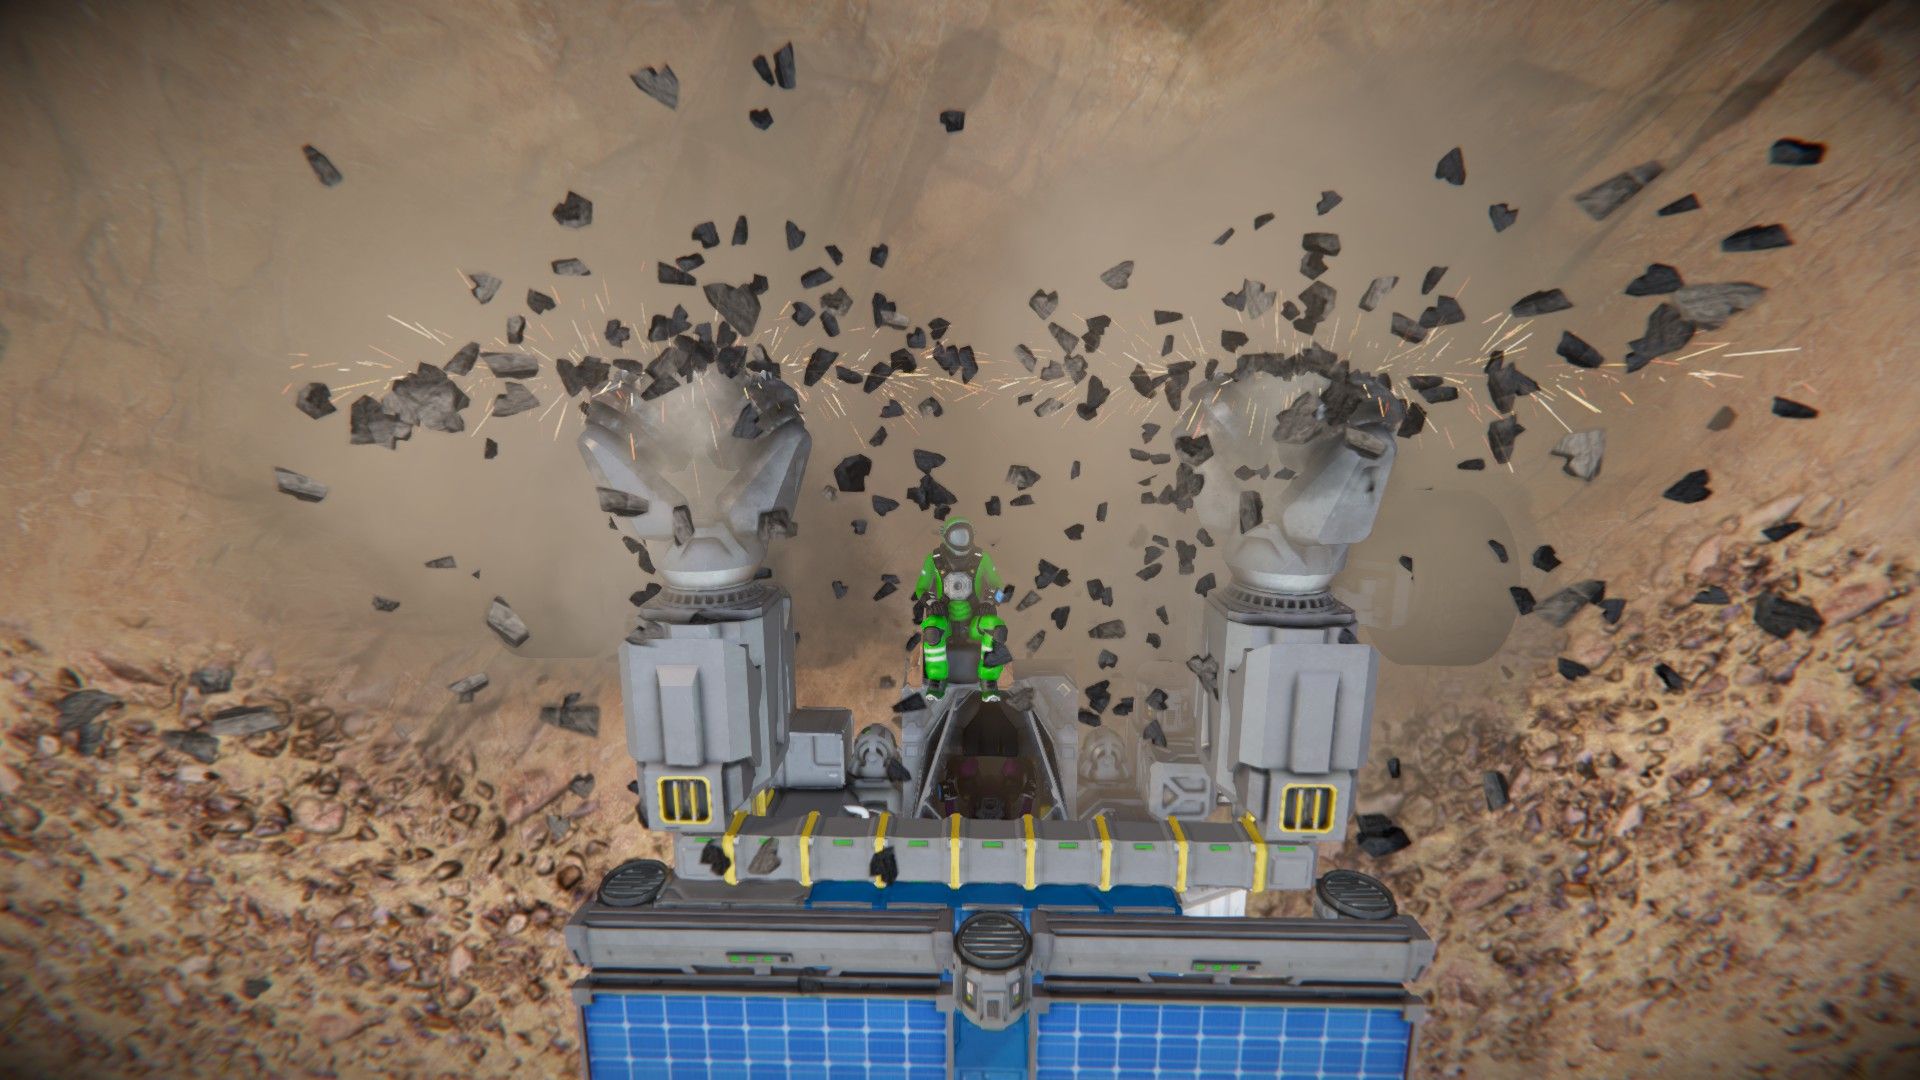 Video game screenshot of a person riding a vehicle that is burrowing down into a pit, debris flying everywhere